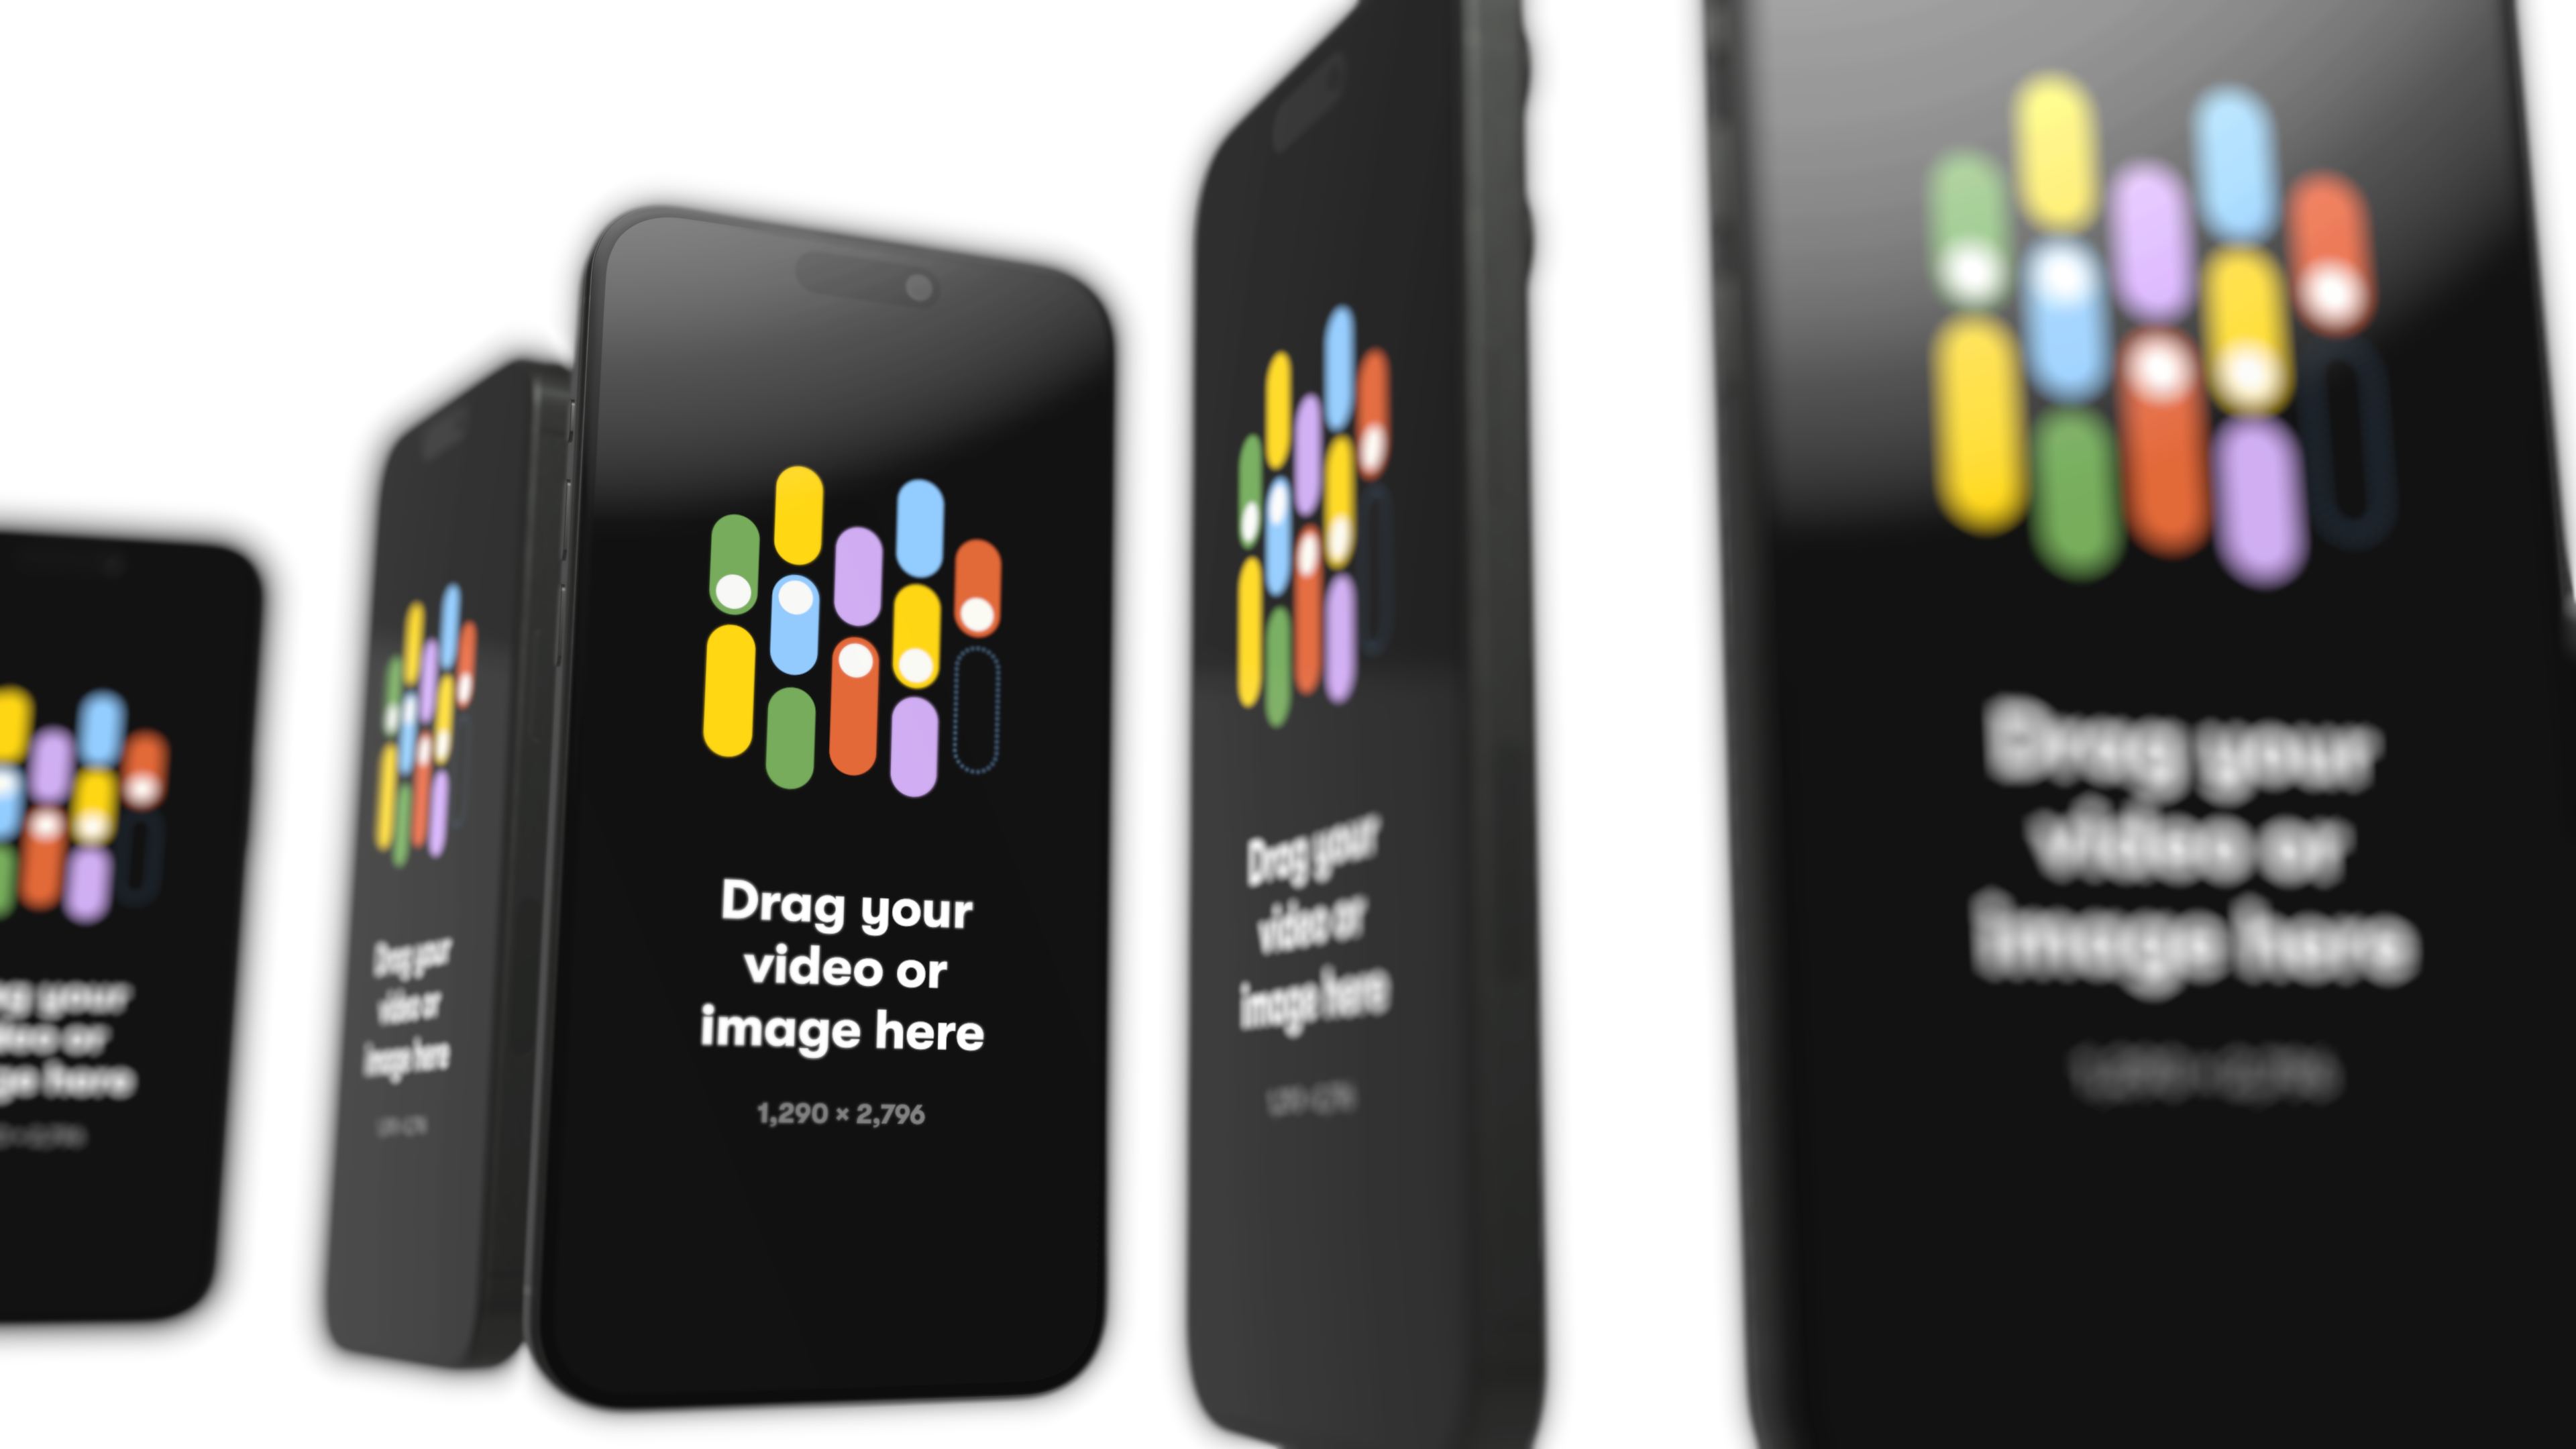 5 iPhone mockups with one iPhone in focus, and the other ones blurred